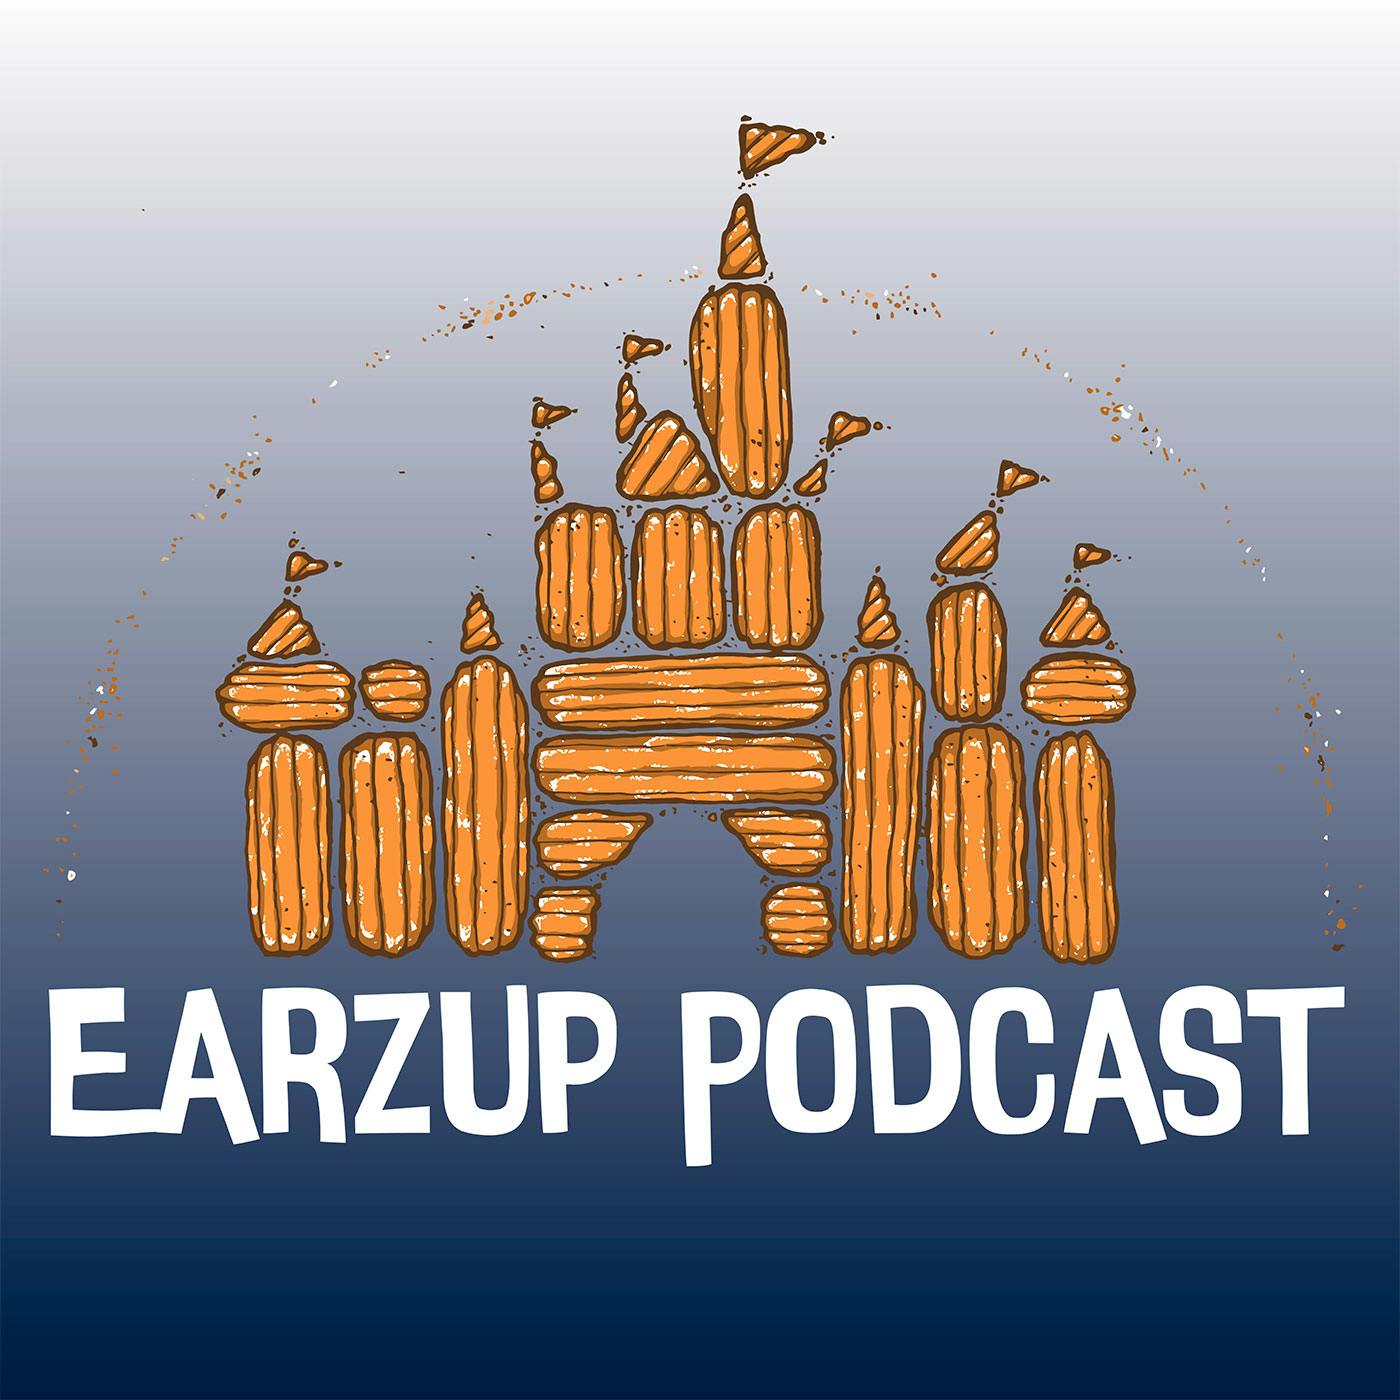 The EarzUp! Halloween Special: Spooky Stories